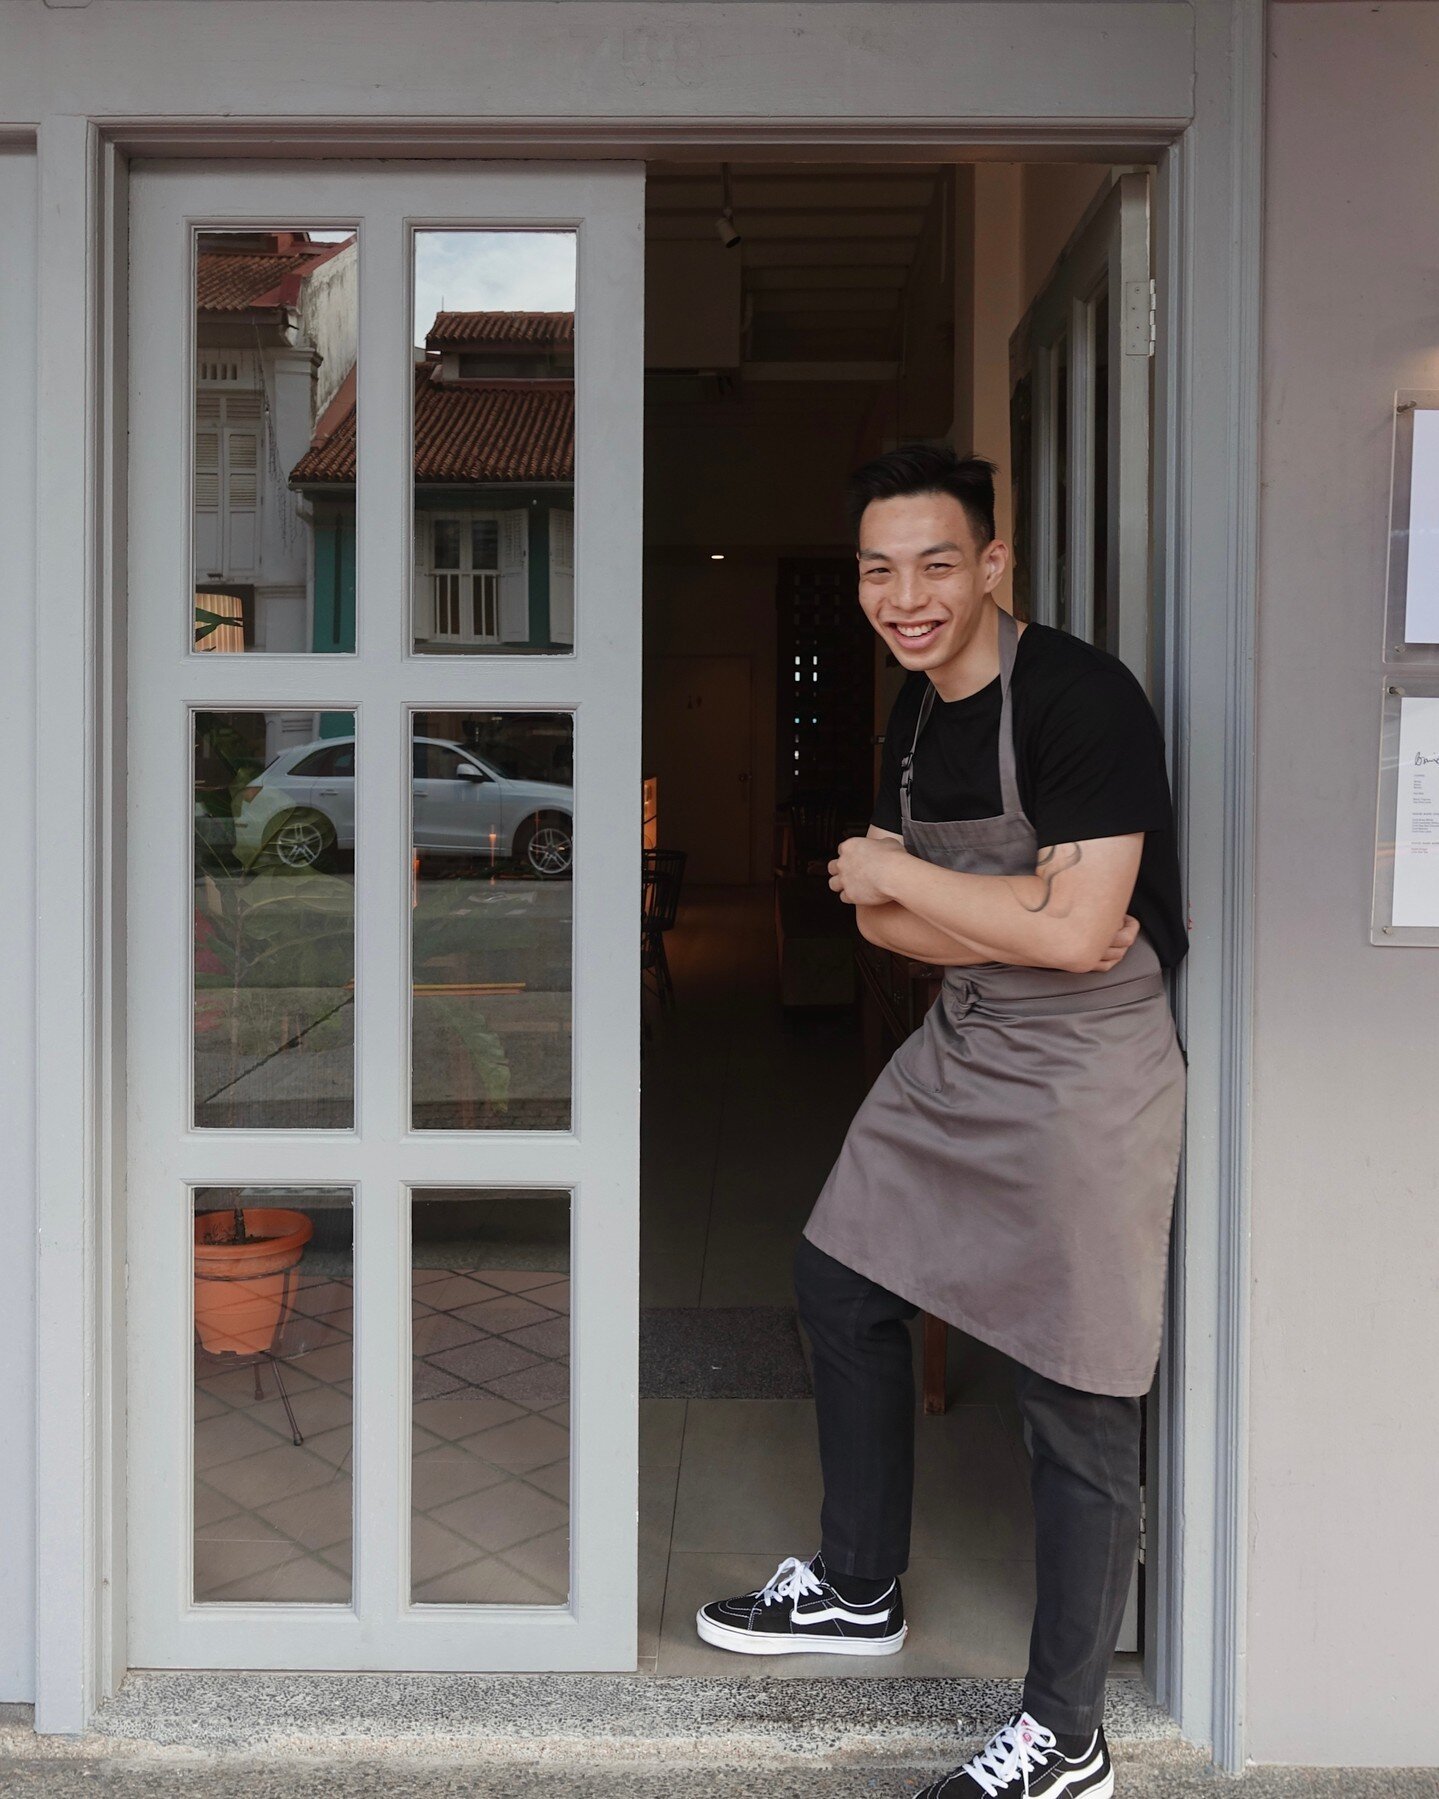 With a passion for cooking that's hotter than the flames on his stovetop, Chris has become a master of blending traditional Singaporean dishes with a twist of Western flair. Drawing inspiration from his talented mother, Chris spent hours watching her